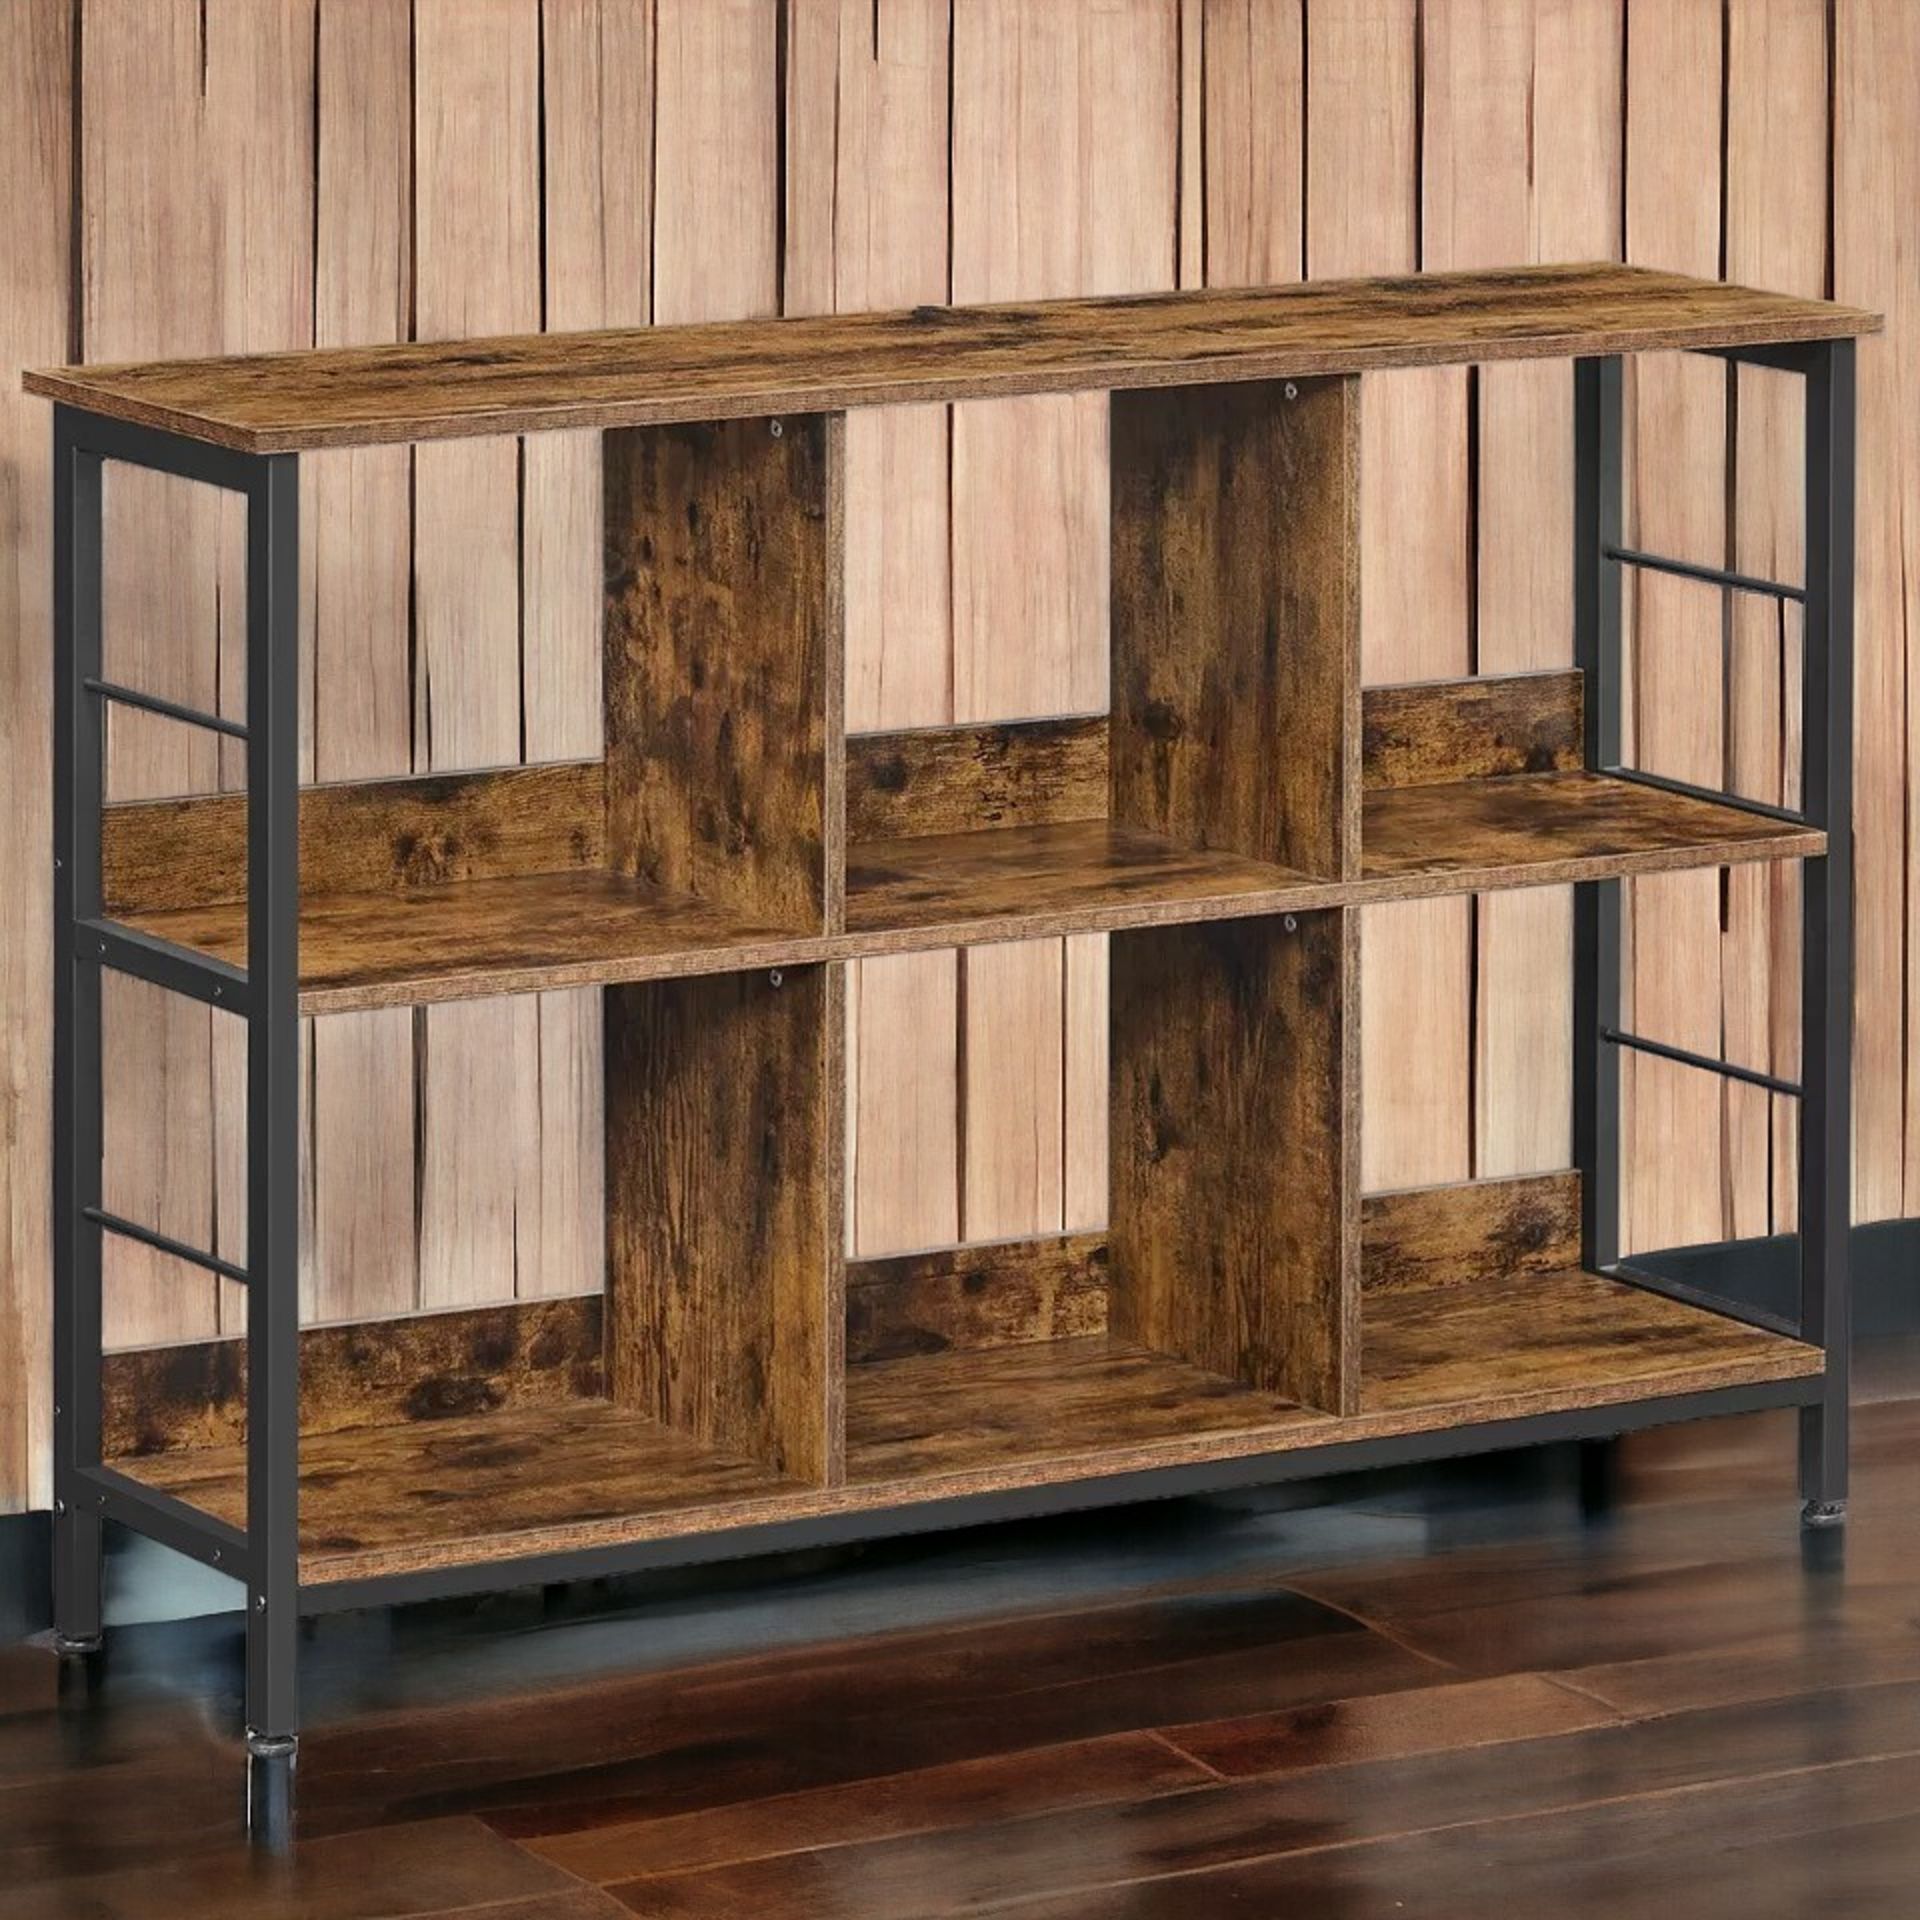 FREE DELIVERY - BRAND NEW BOOKSHELF BOOKCASE SHELVING UNIT CONSOLE TABLE